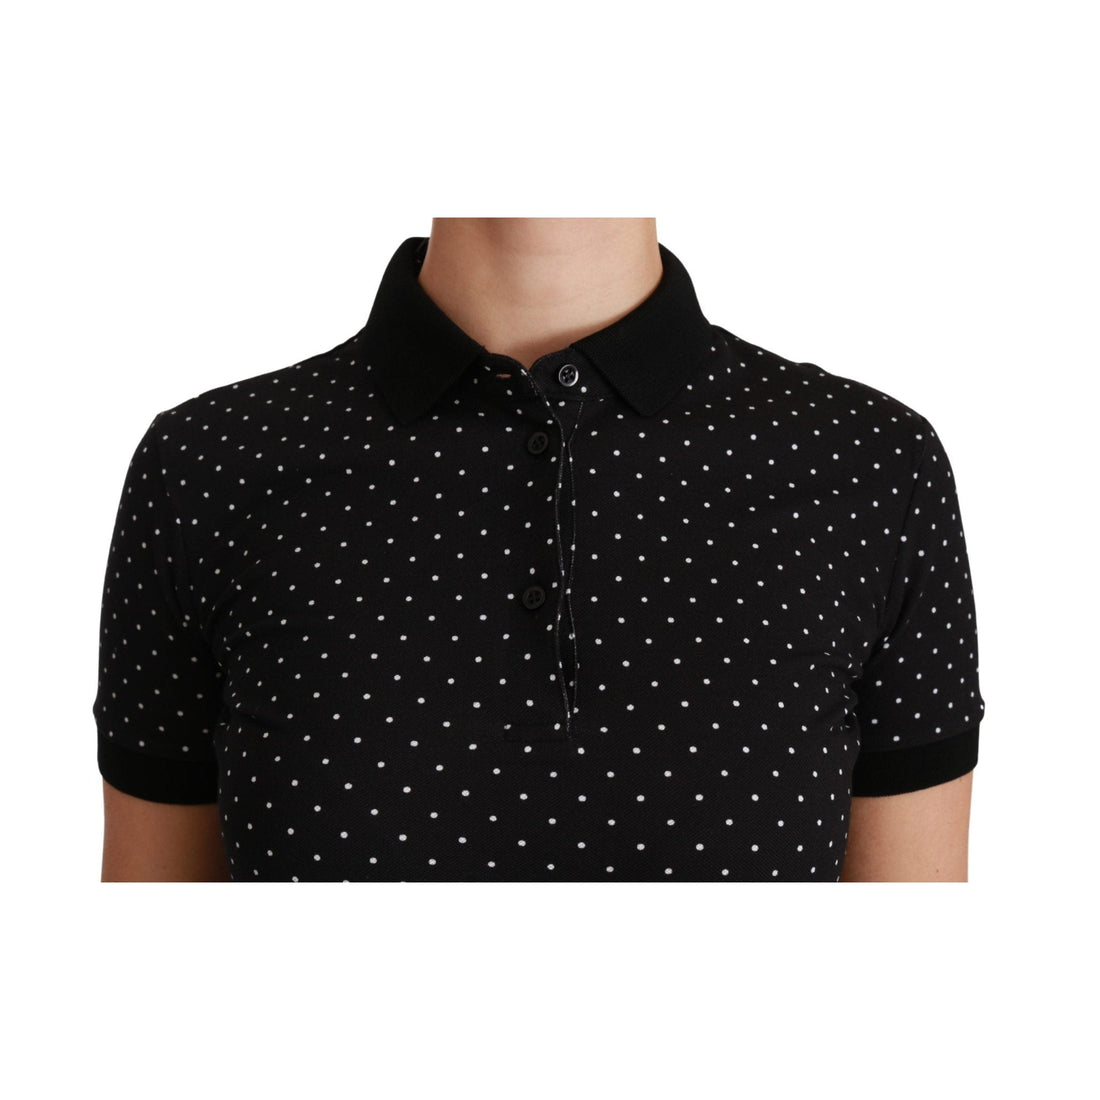 Dolce & Gabbana Black Dotted Collared Polo Shirt Cotton Top - Paris Deluxe